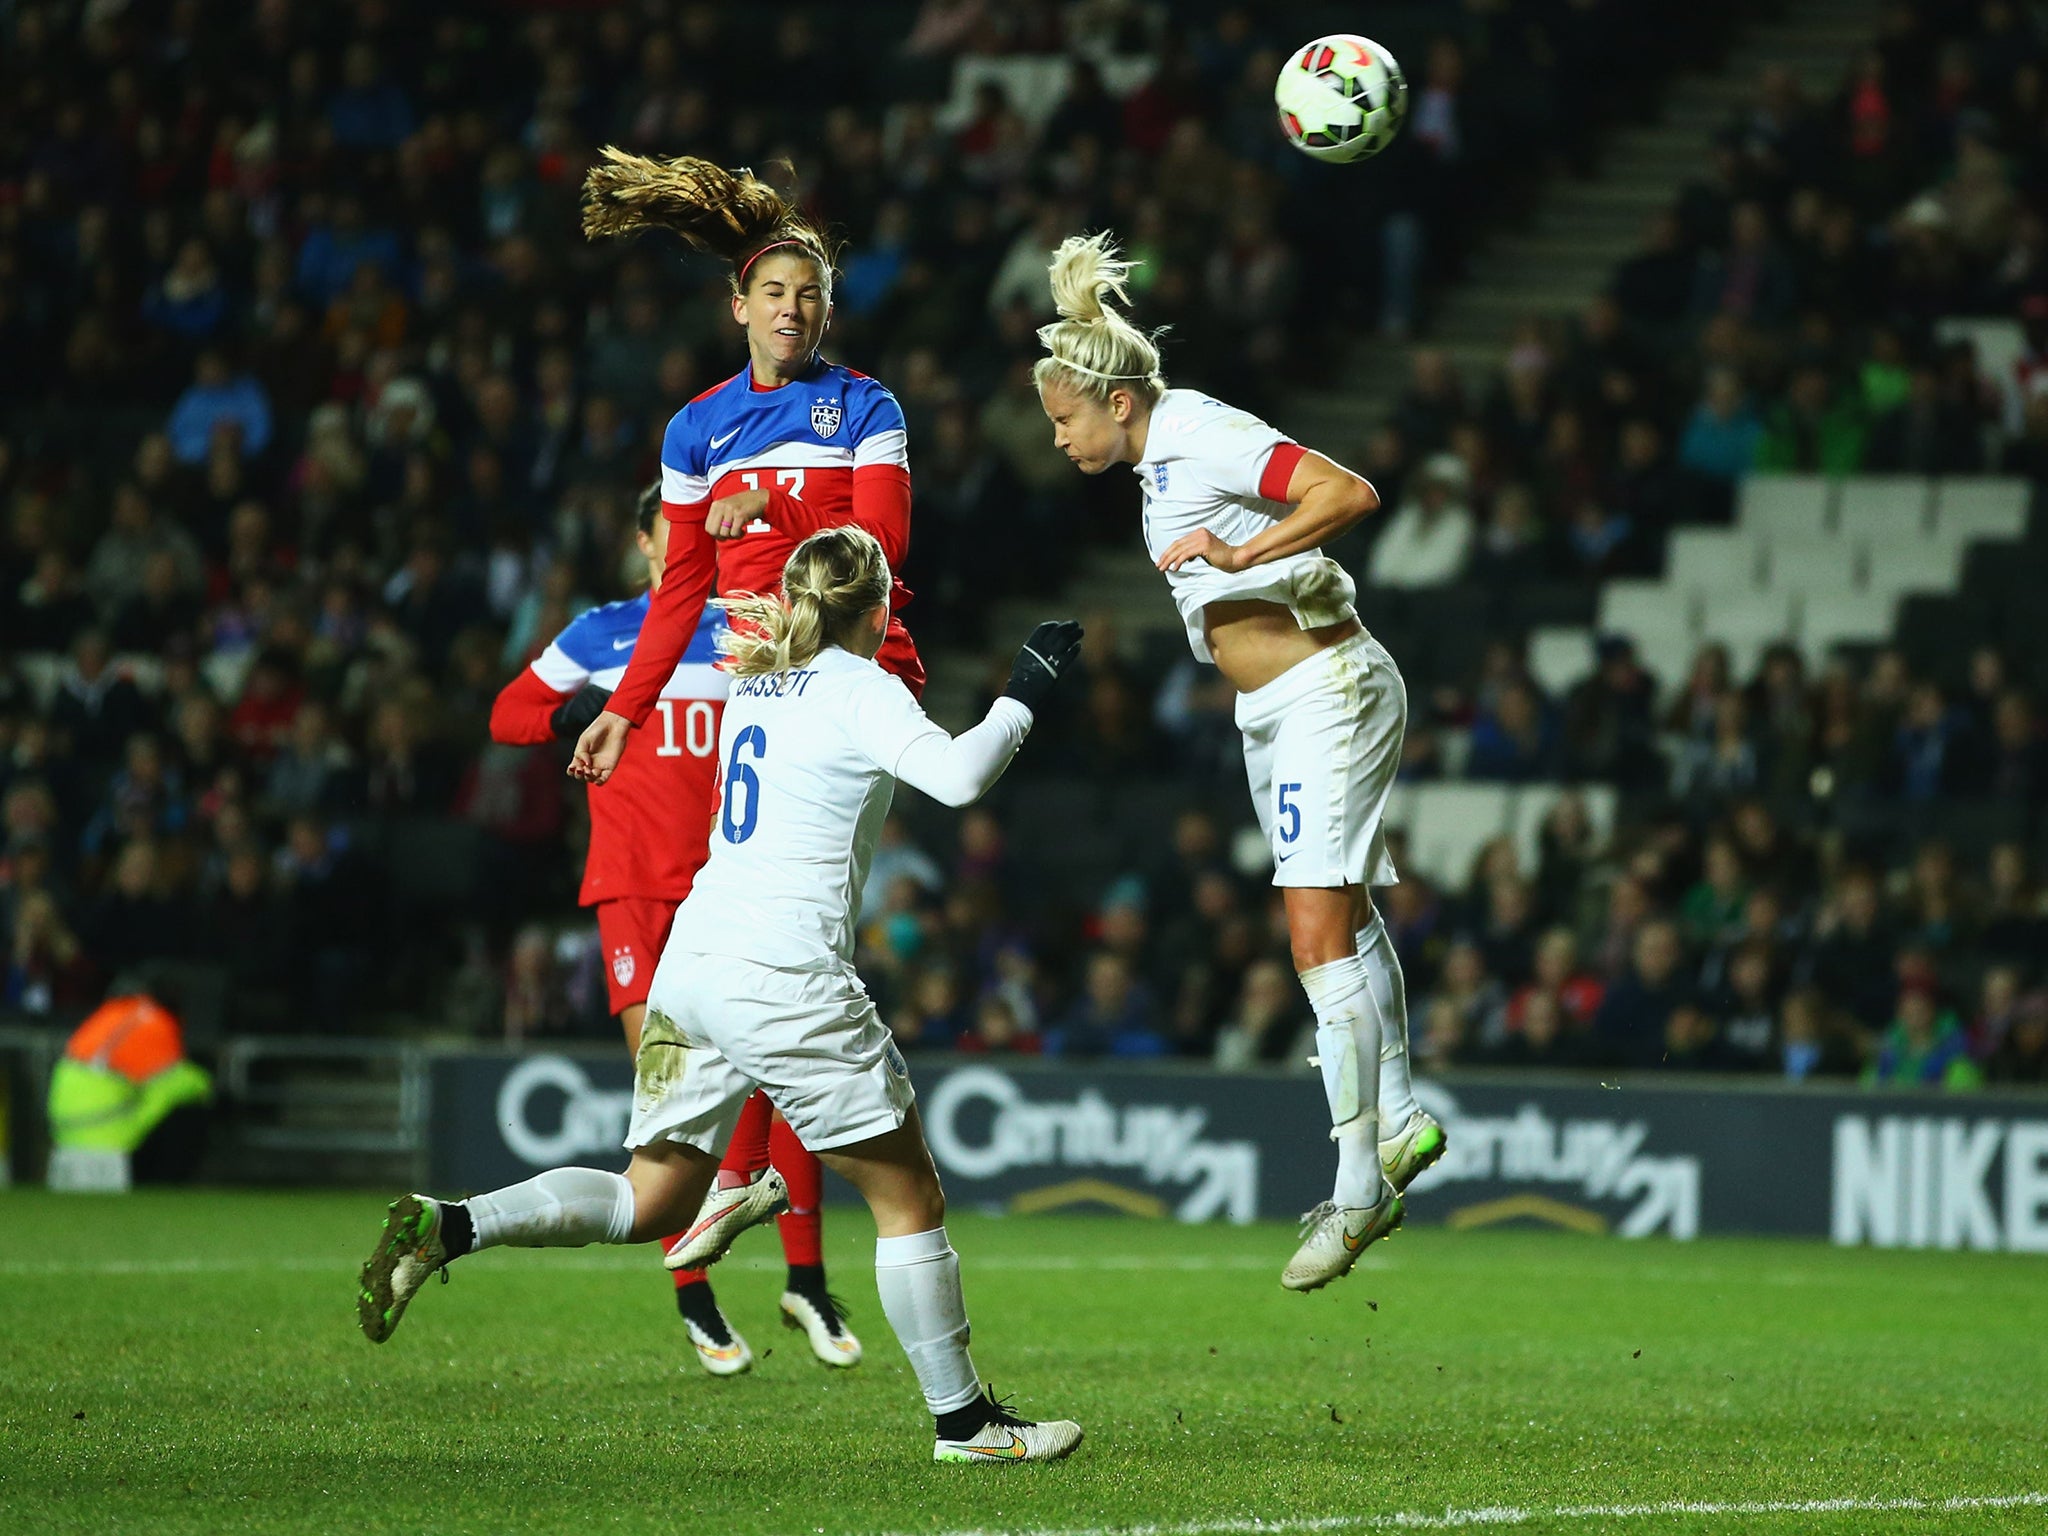 Alex Morgan rises above the England defence to score the only goal of the game